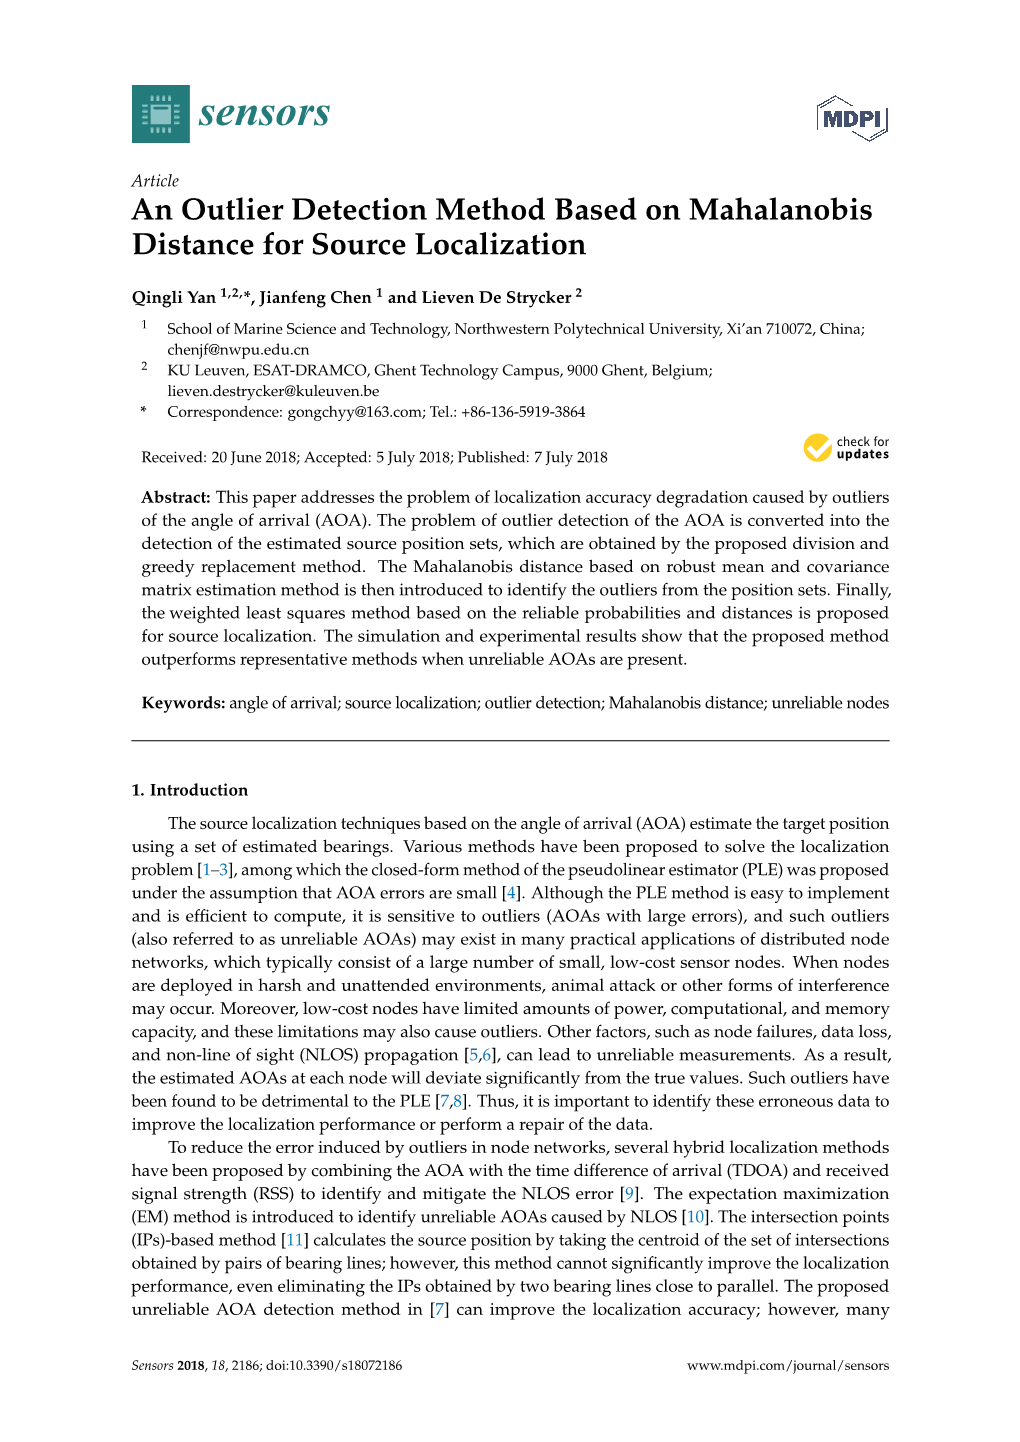 An Outlier Detection Method Based on Mahalanobis Distance for Source Localization